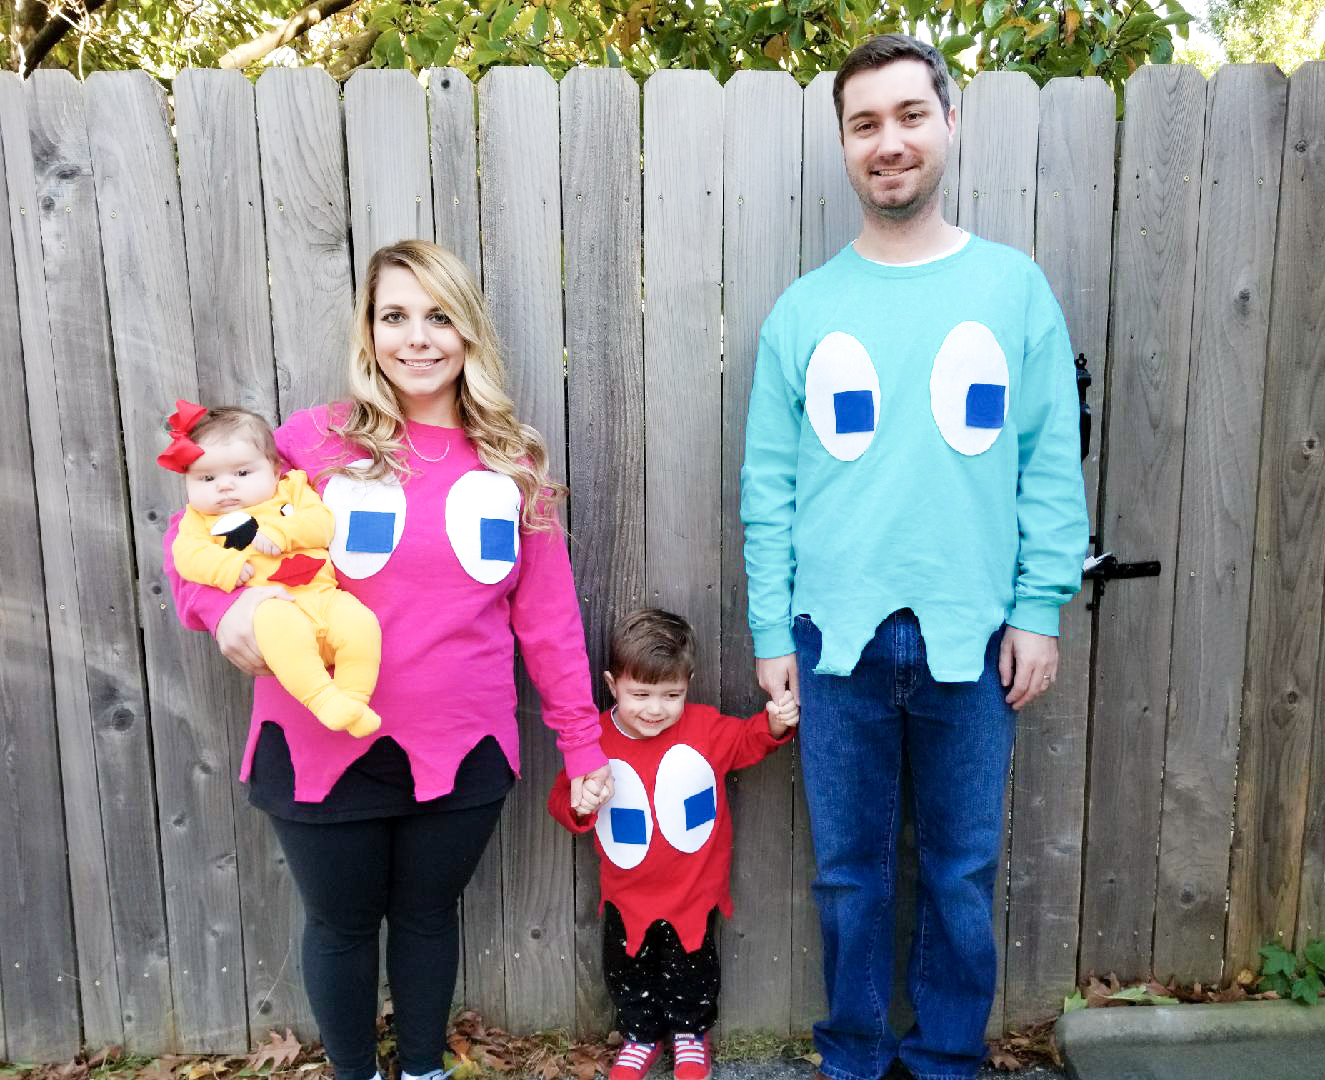 Ms. Pacman and Ghosts Costumes! Here's a DIY family Halloween costume idea that is easy to put together, even as a last-minute Halloween costume! This family Halloween costume could also be adapted to a regular Pac-man for a boy infant or toddler. Pacman and Ms. Pacman costumes would also be great for cosplay or dress-up outside of Halloween, too!